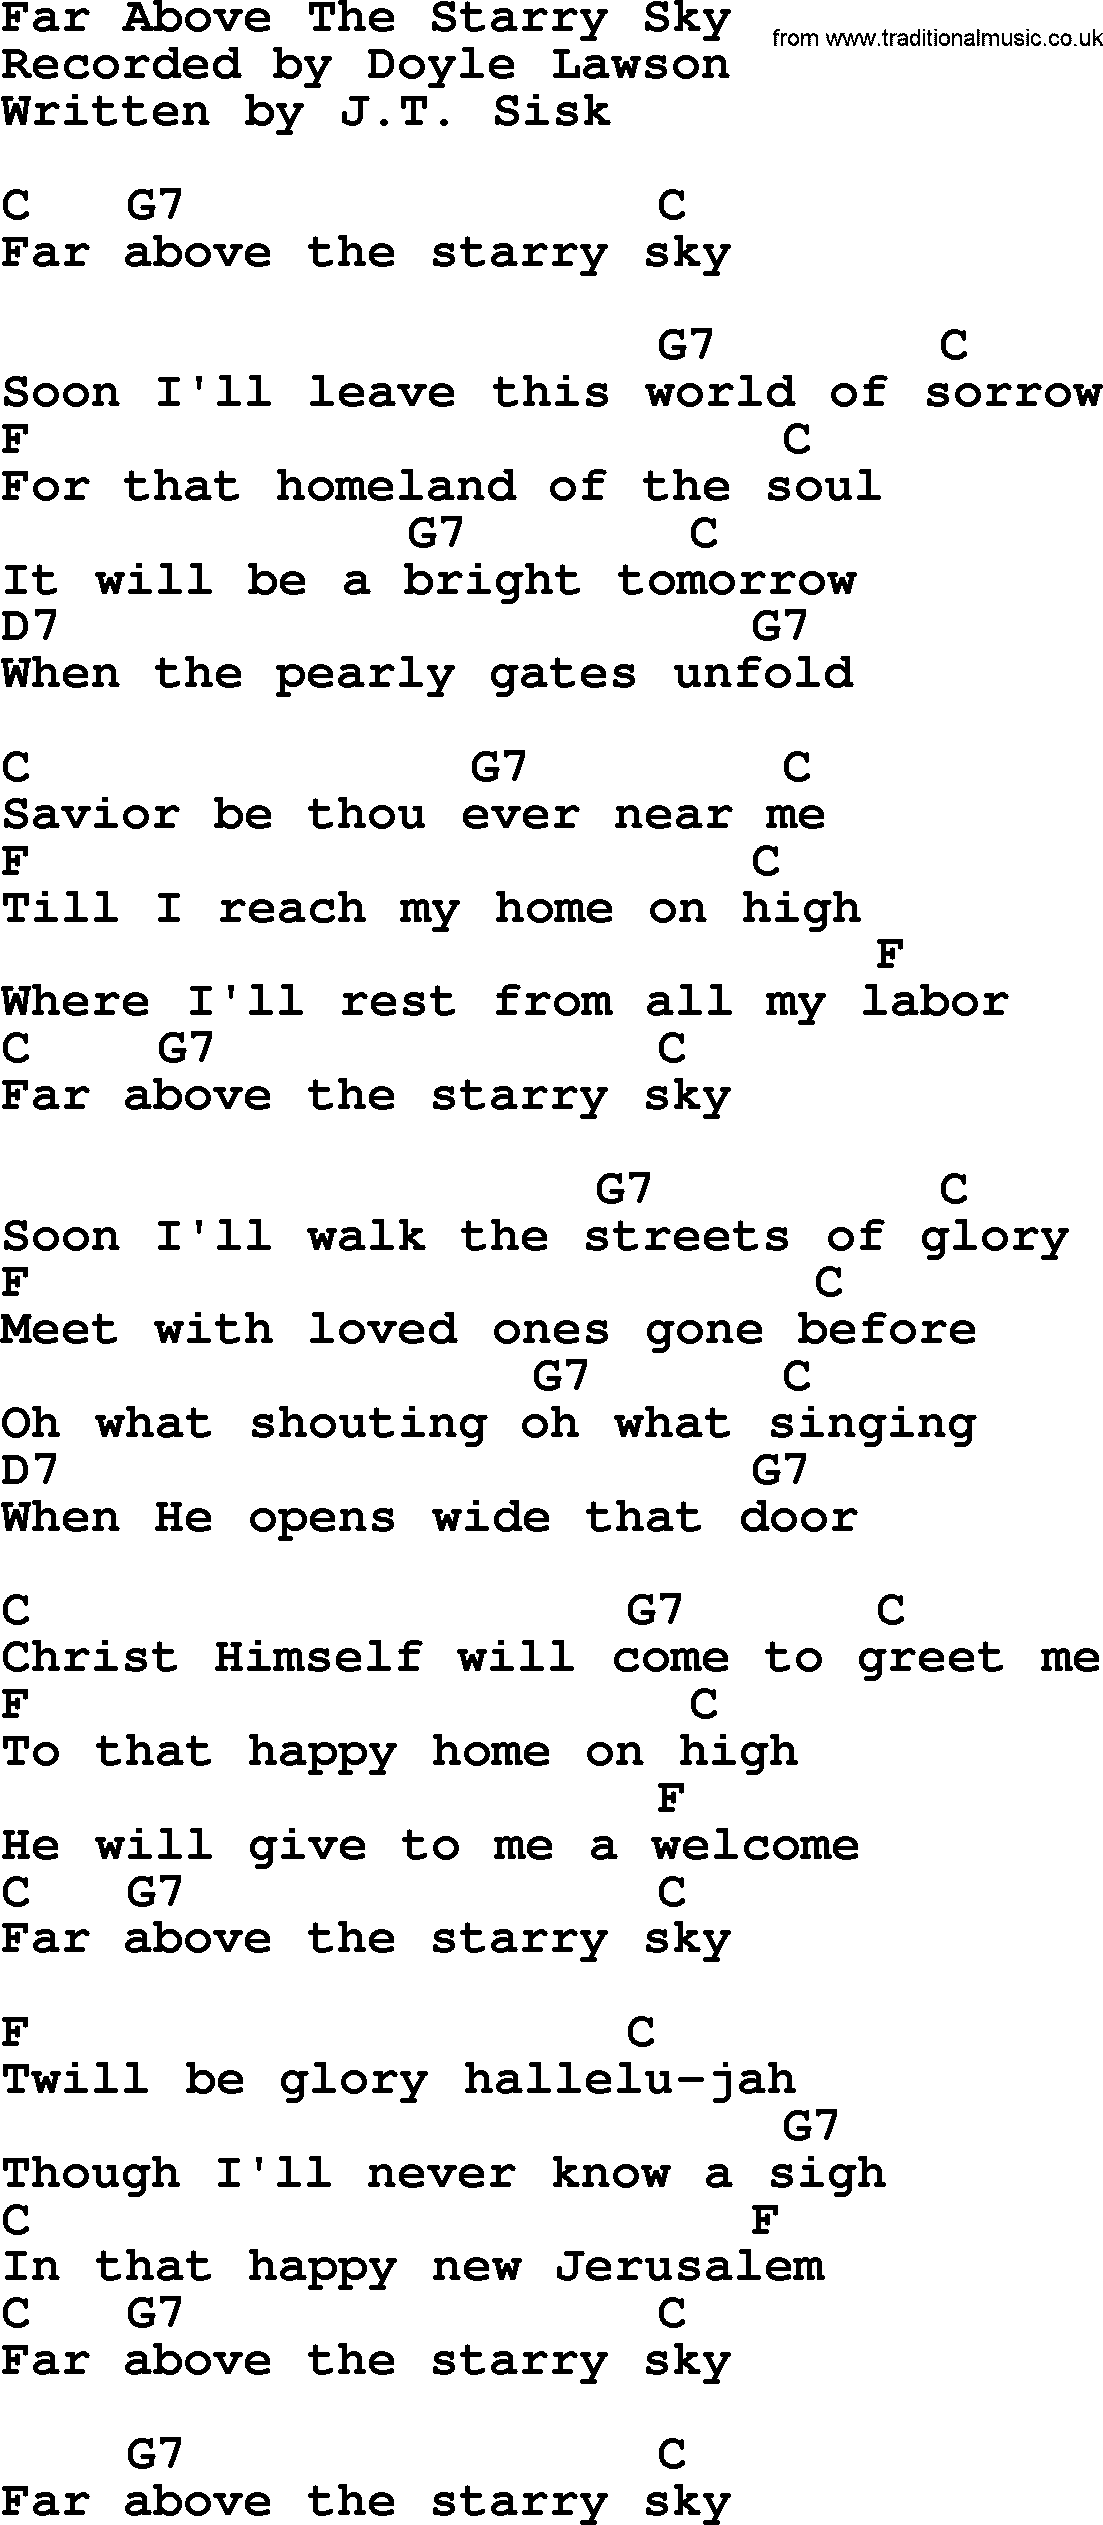 Bluegrass song: Far Above The Starry Sky, lyrics and chords